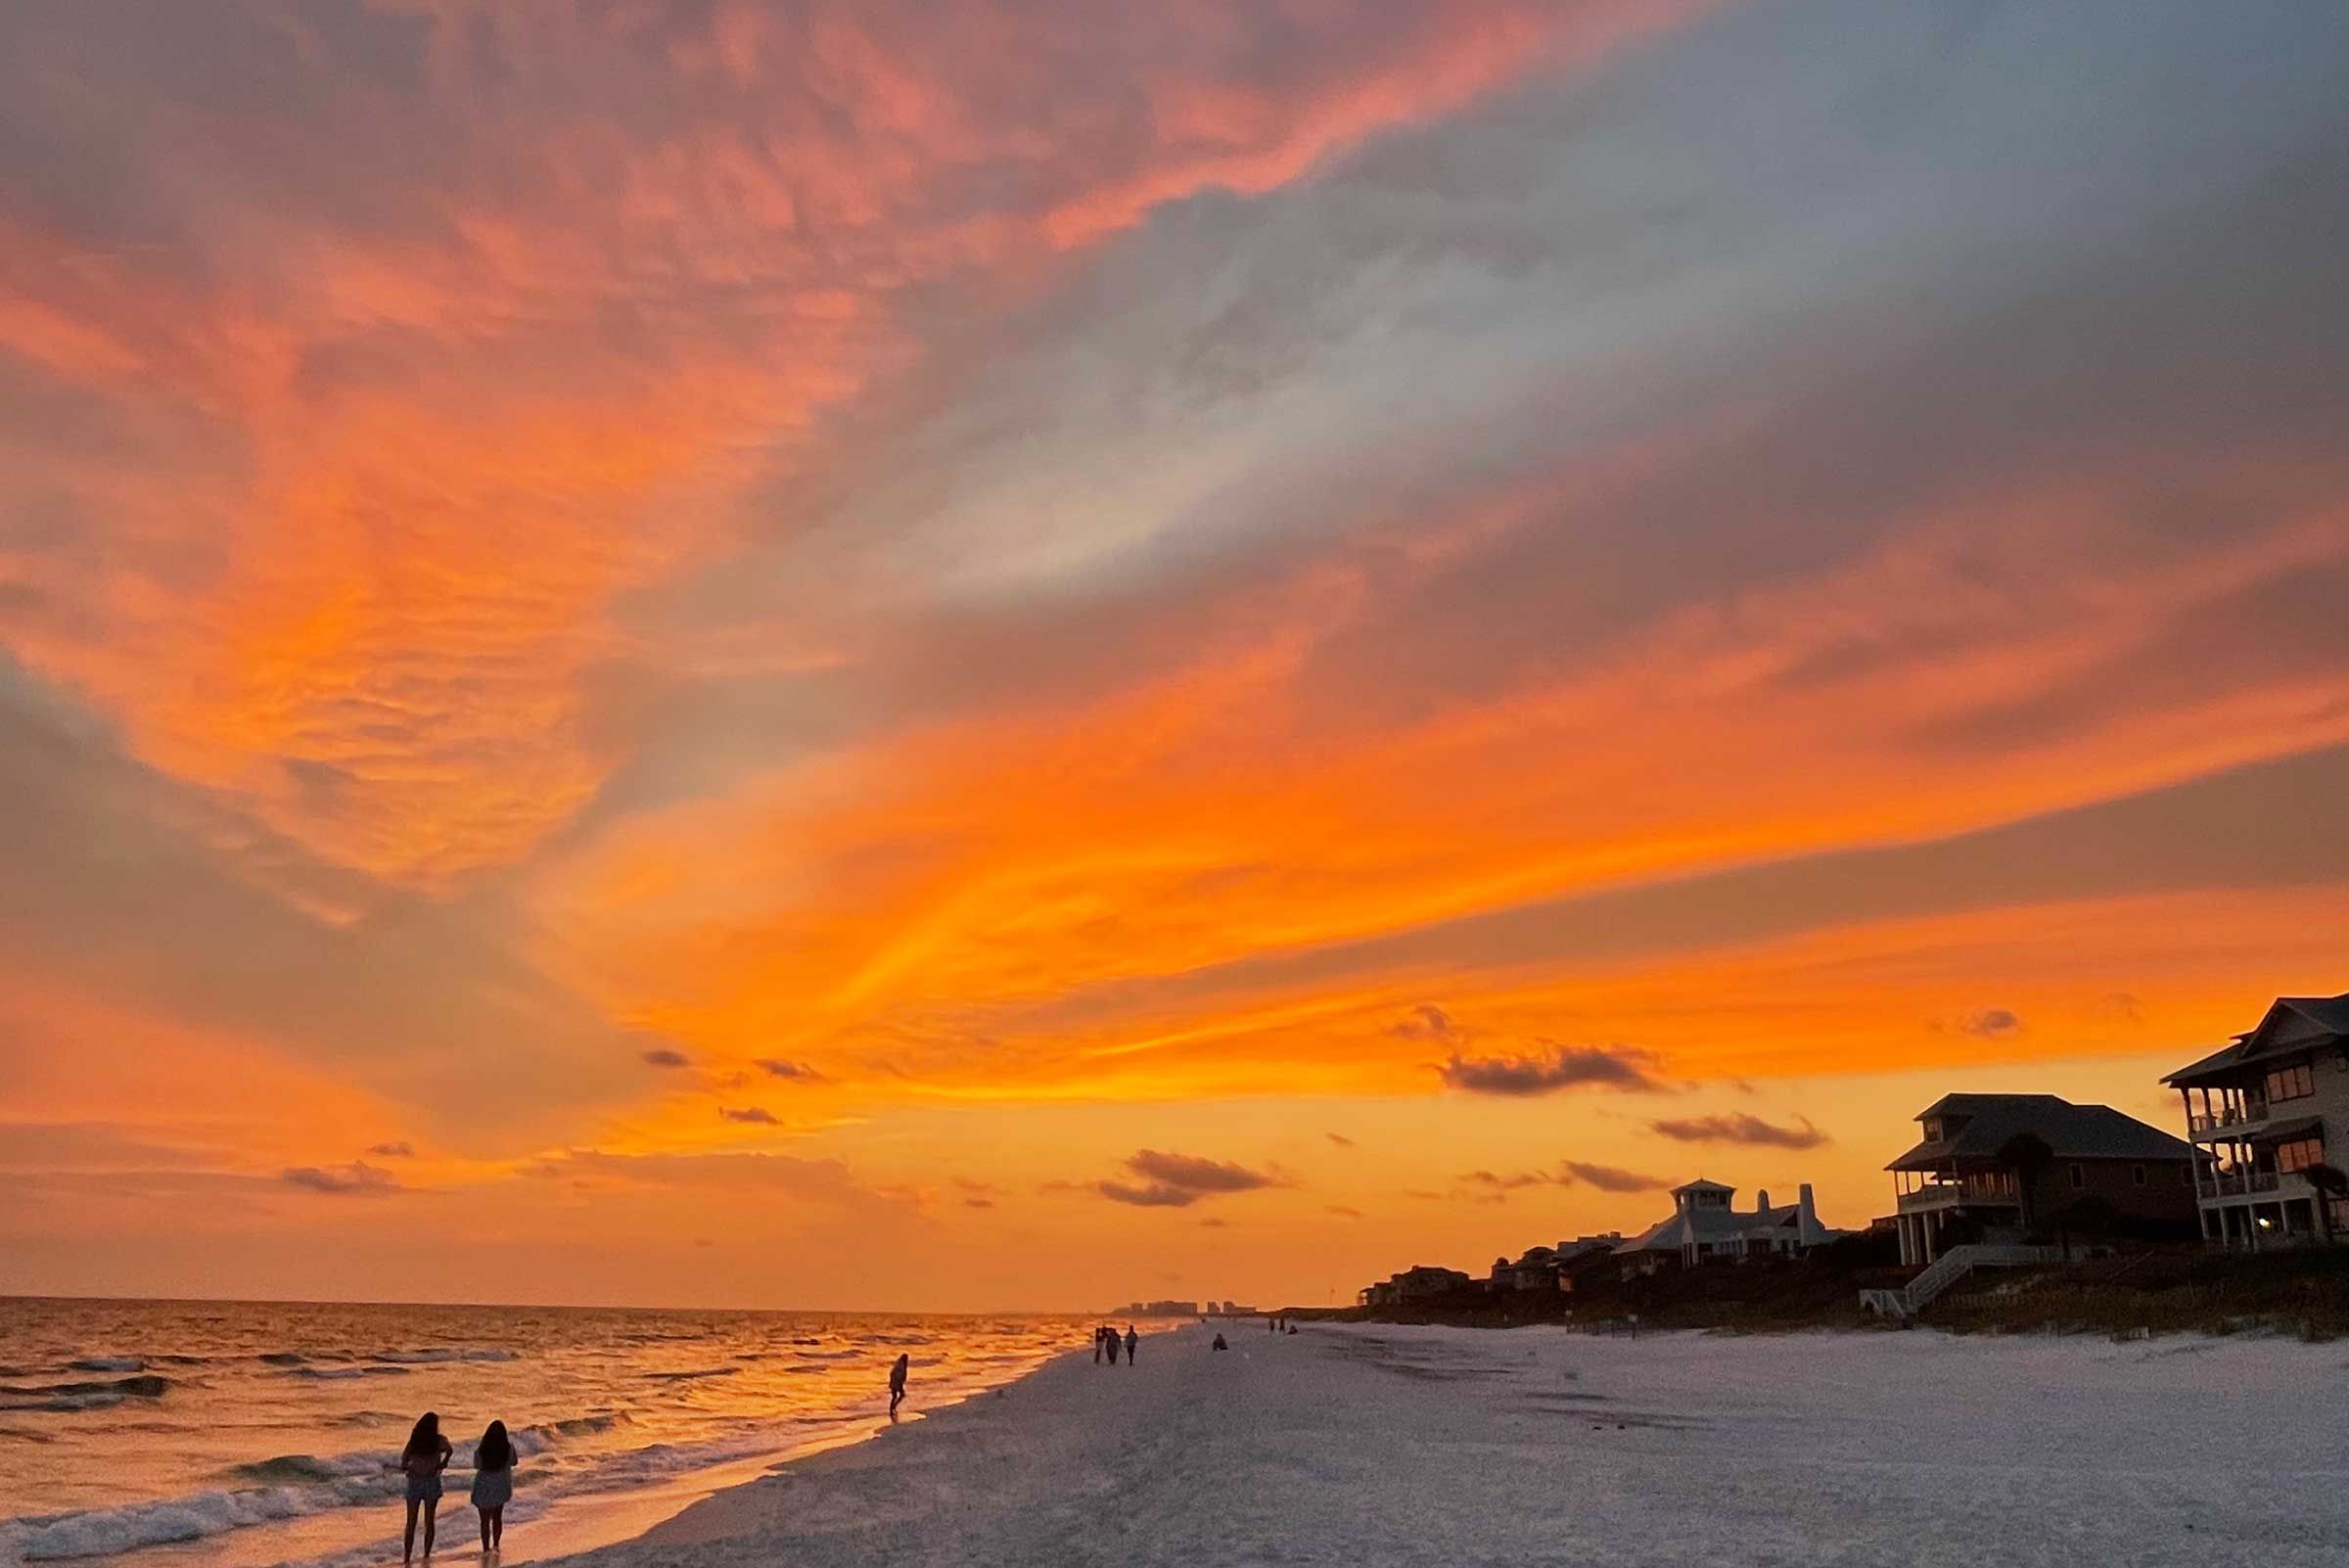 Sunset with autumn / fall colors on a 30A beach in South Walton, FL